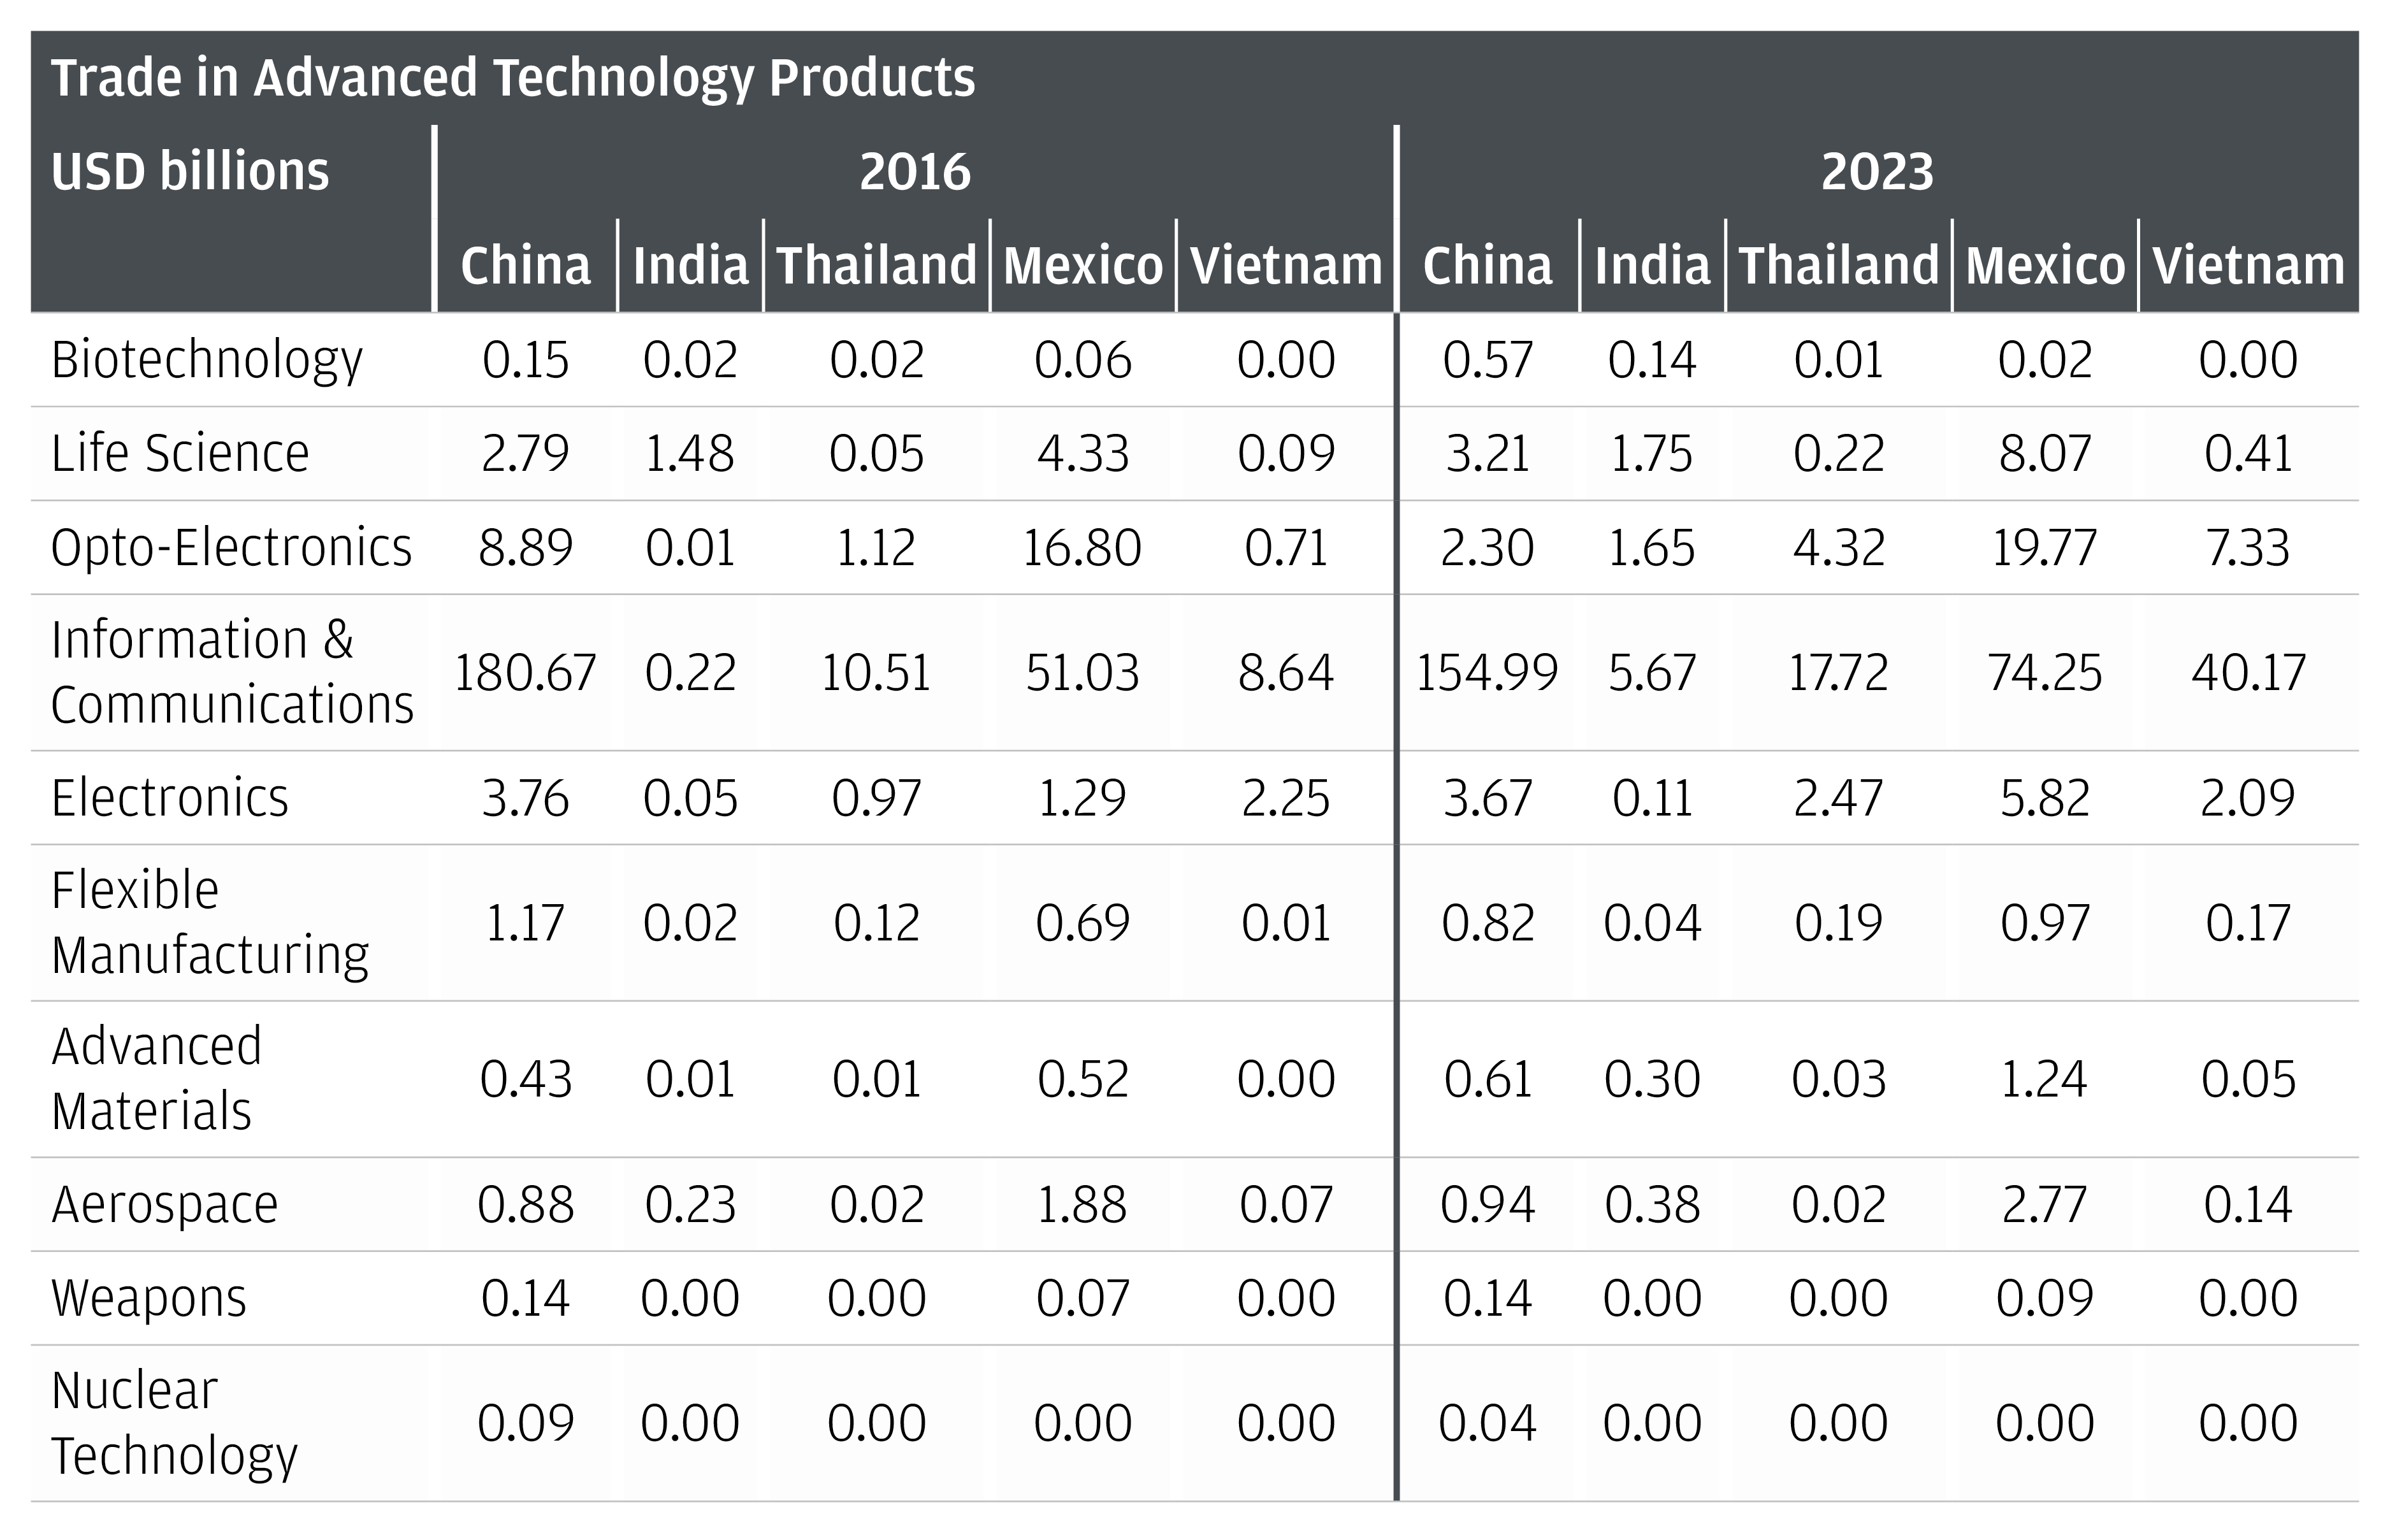 The chart describes the trade of U.S. imports of Advanced Technology Products by country (China, India, Thailand, Mexico, Vietnam) in 2016 and 2023.